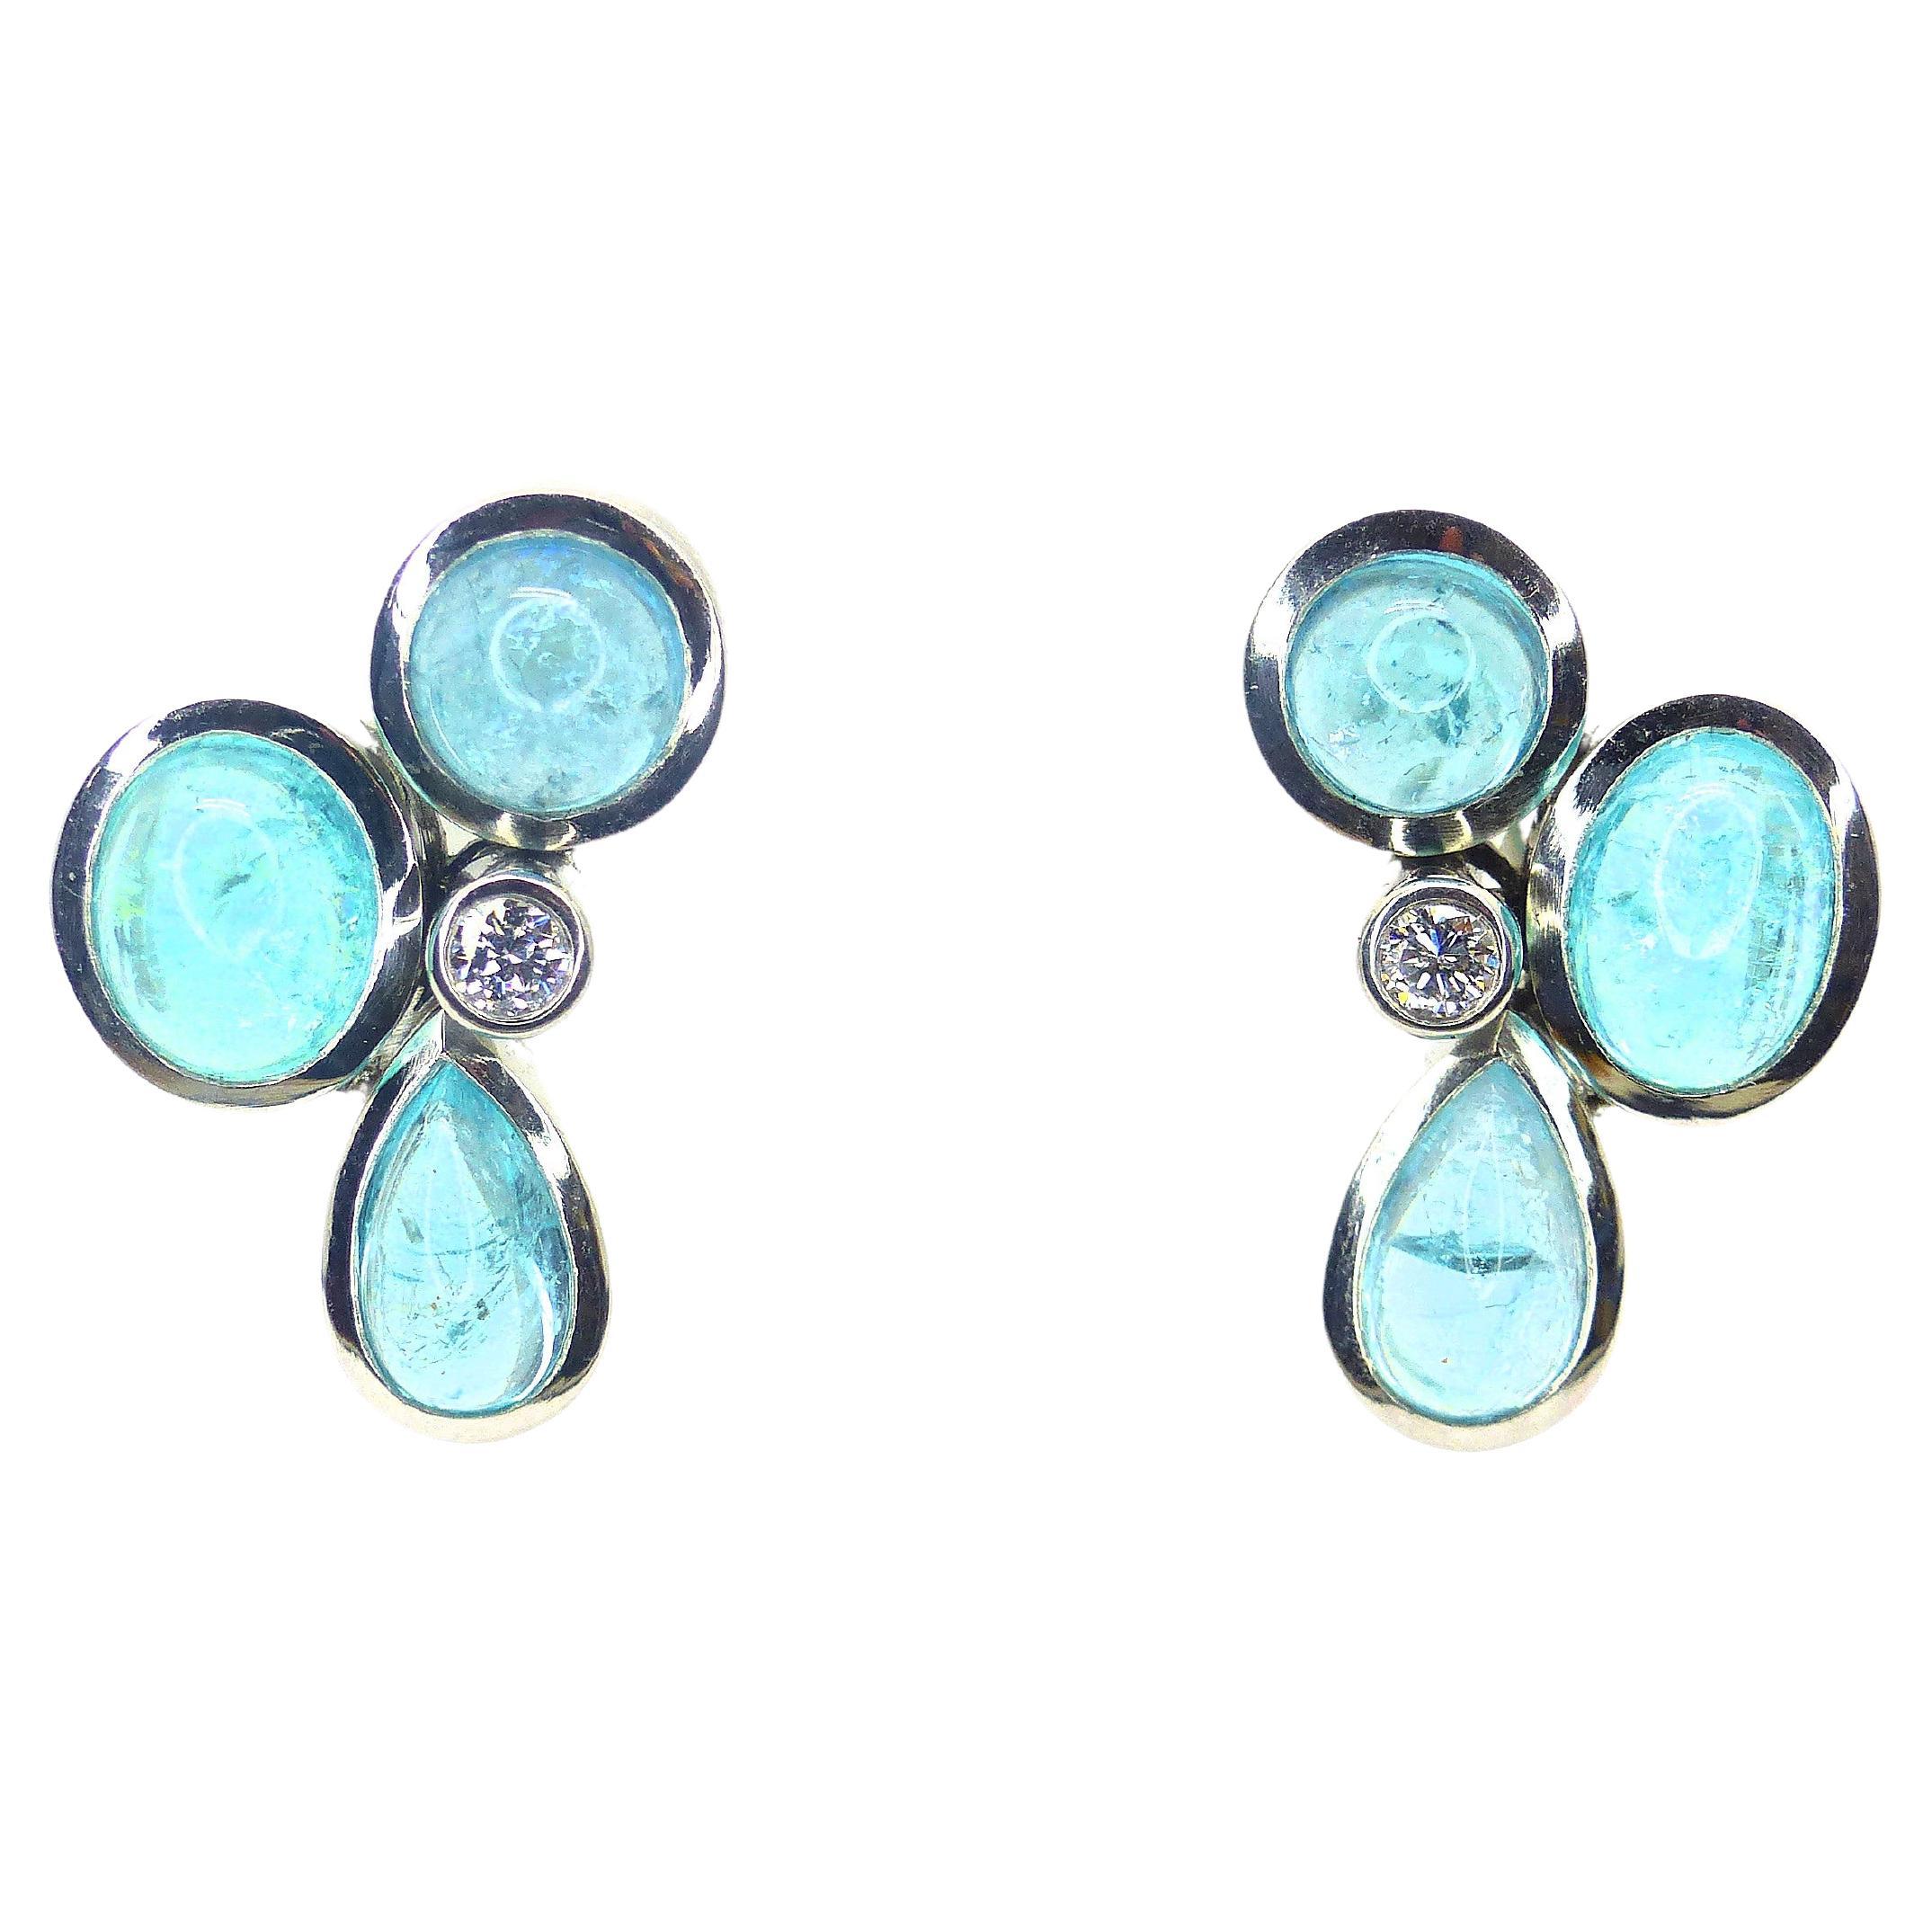 Earrings in Platinum with 6 Paraiba Tourmaline Cabouchons and 2 Diamonds